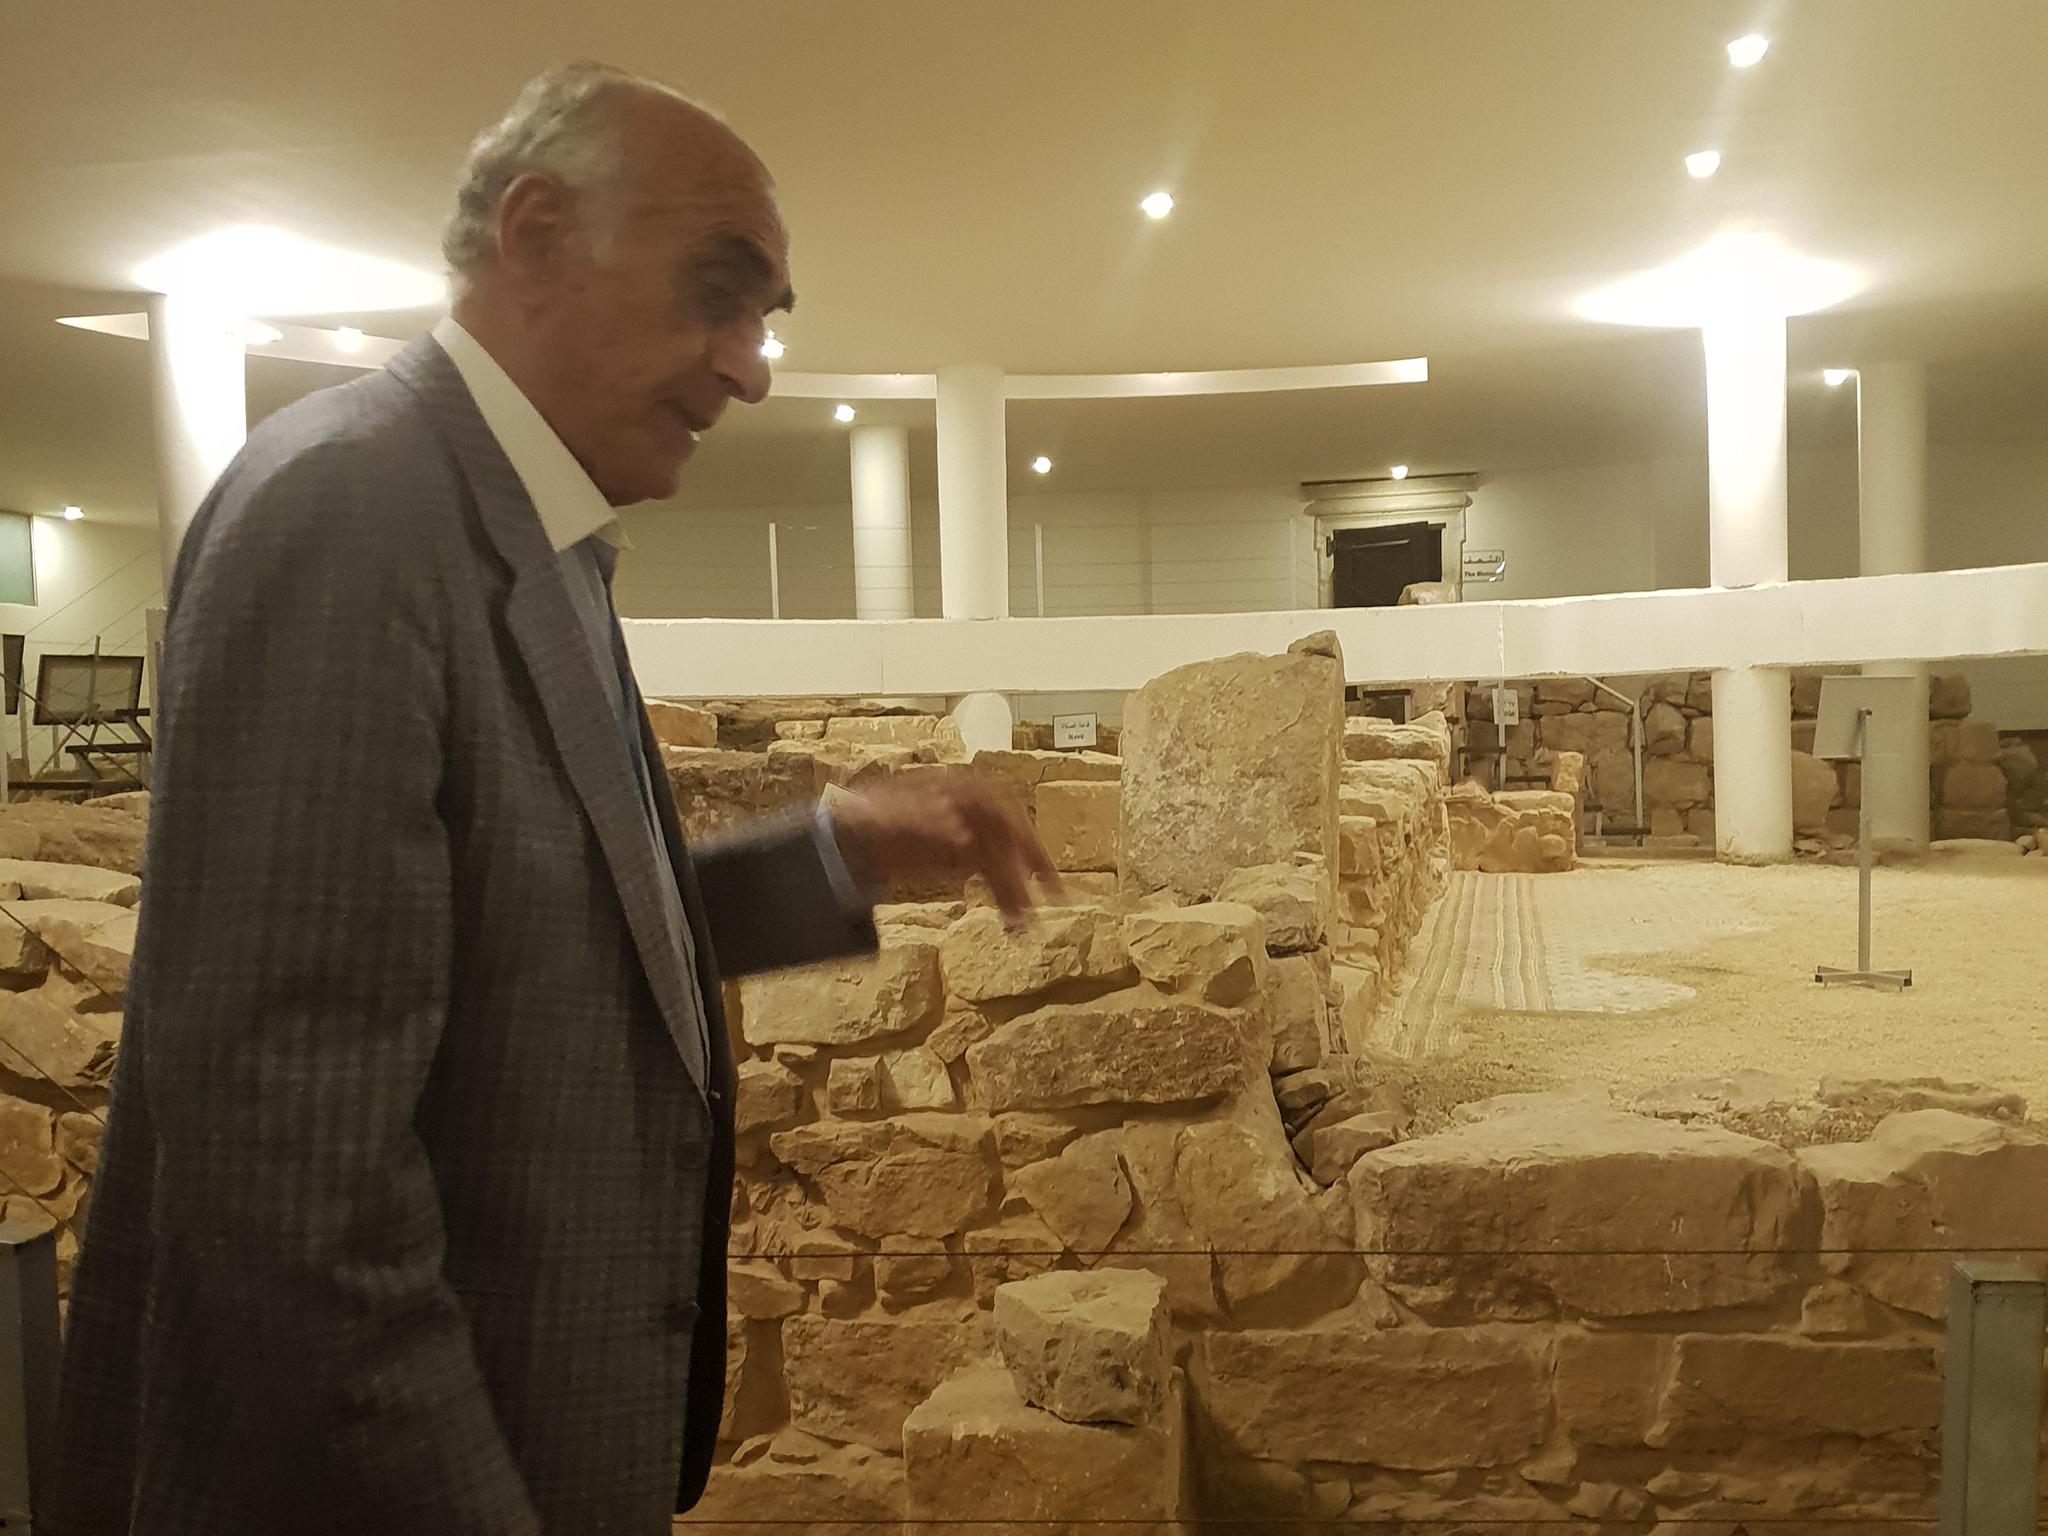 In underground ruins of a 4th-century Byzantine church, recovered and preserved when he built his neo-Renaissance 'House of Palestine' in the occupied West Bank